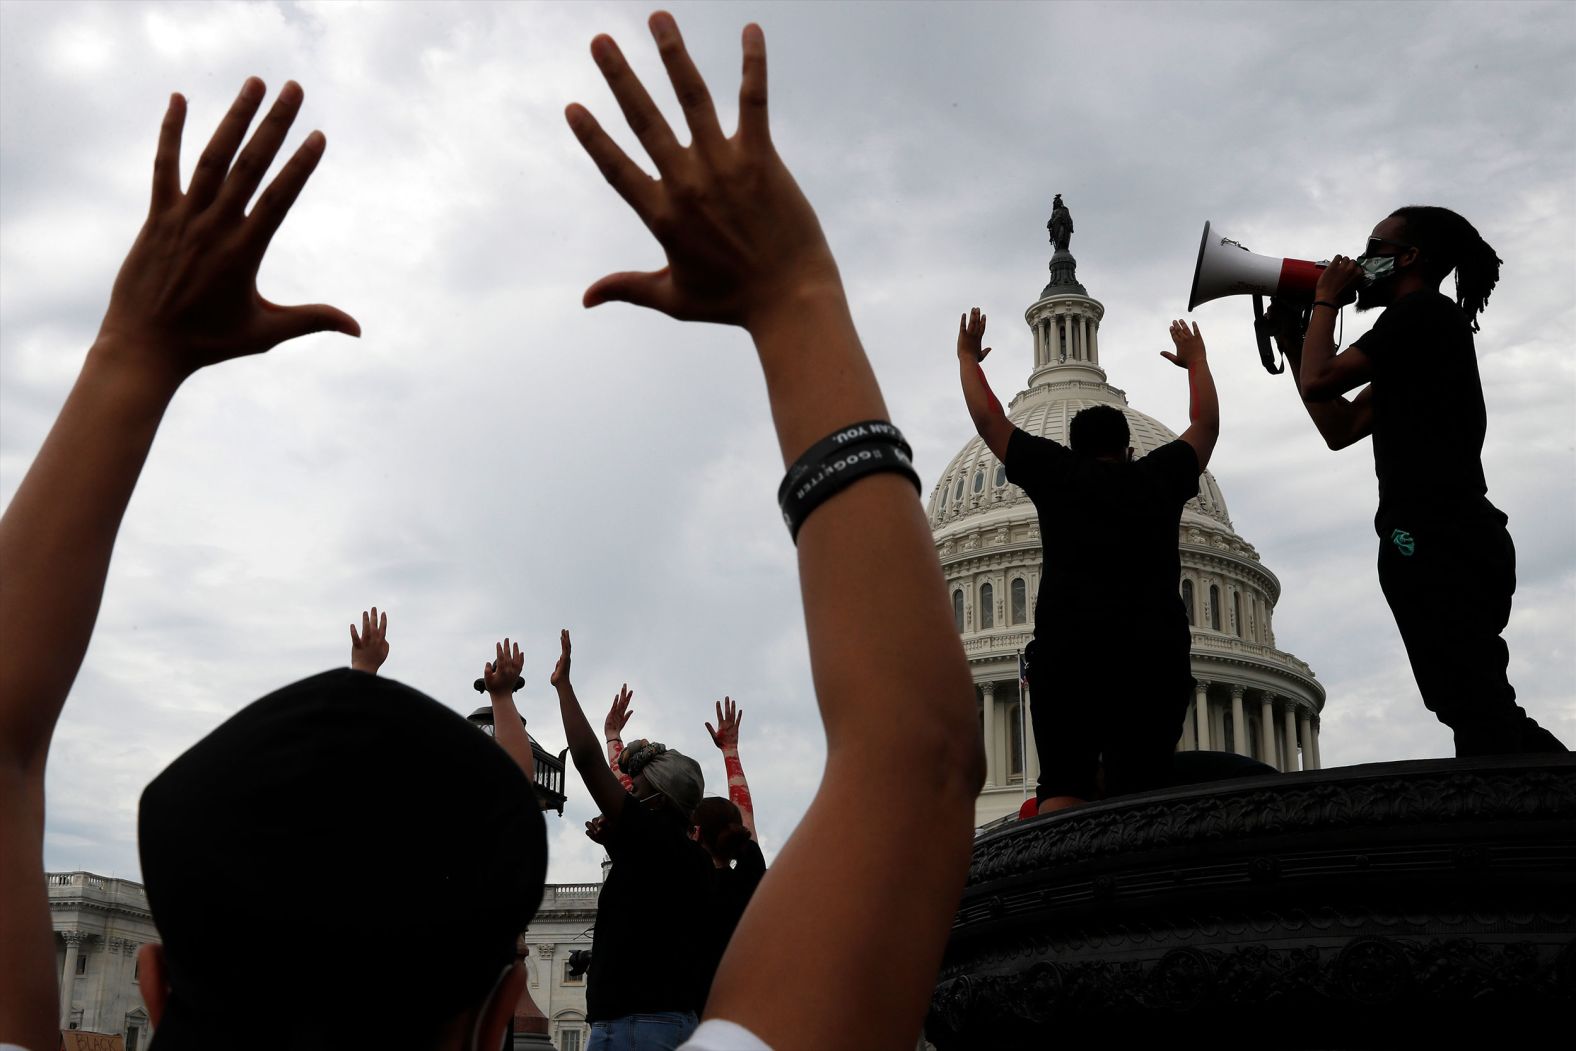 People protest near the US Capitol in Washington, DC, on June 3.